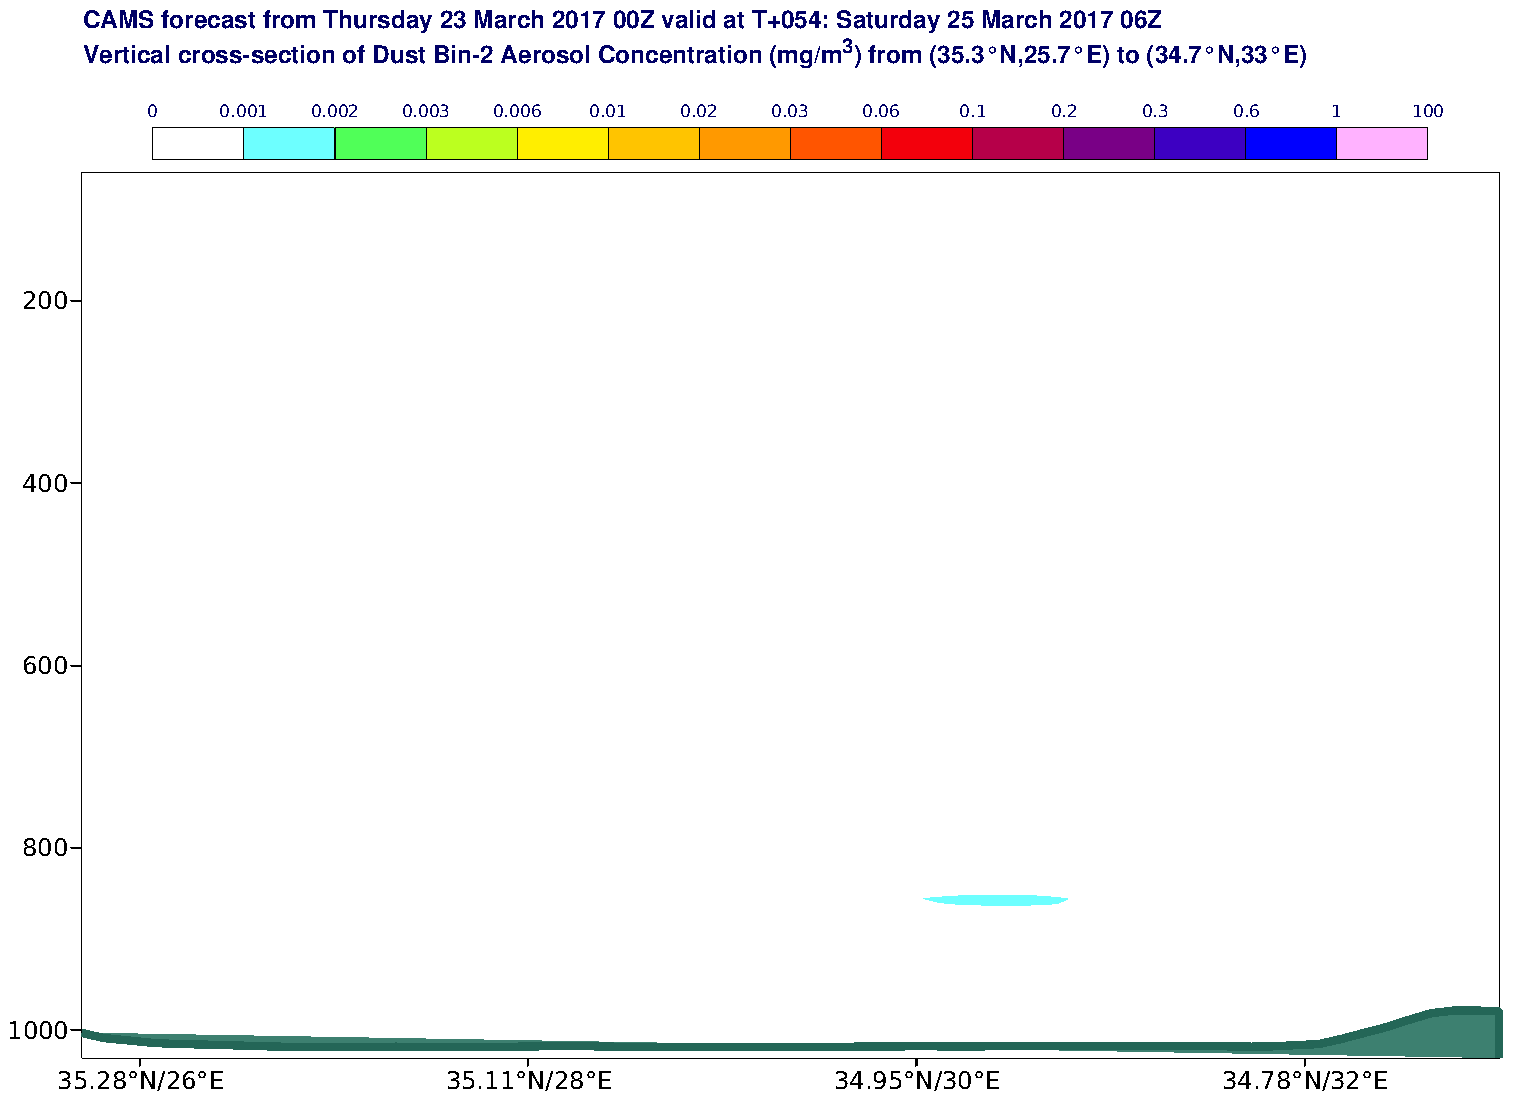 Vertical cross-section of Dust Bin-2 Aerosol Concentration (mg/m3) valid at T54 - 2017-03-25 06:00